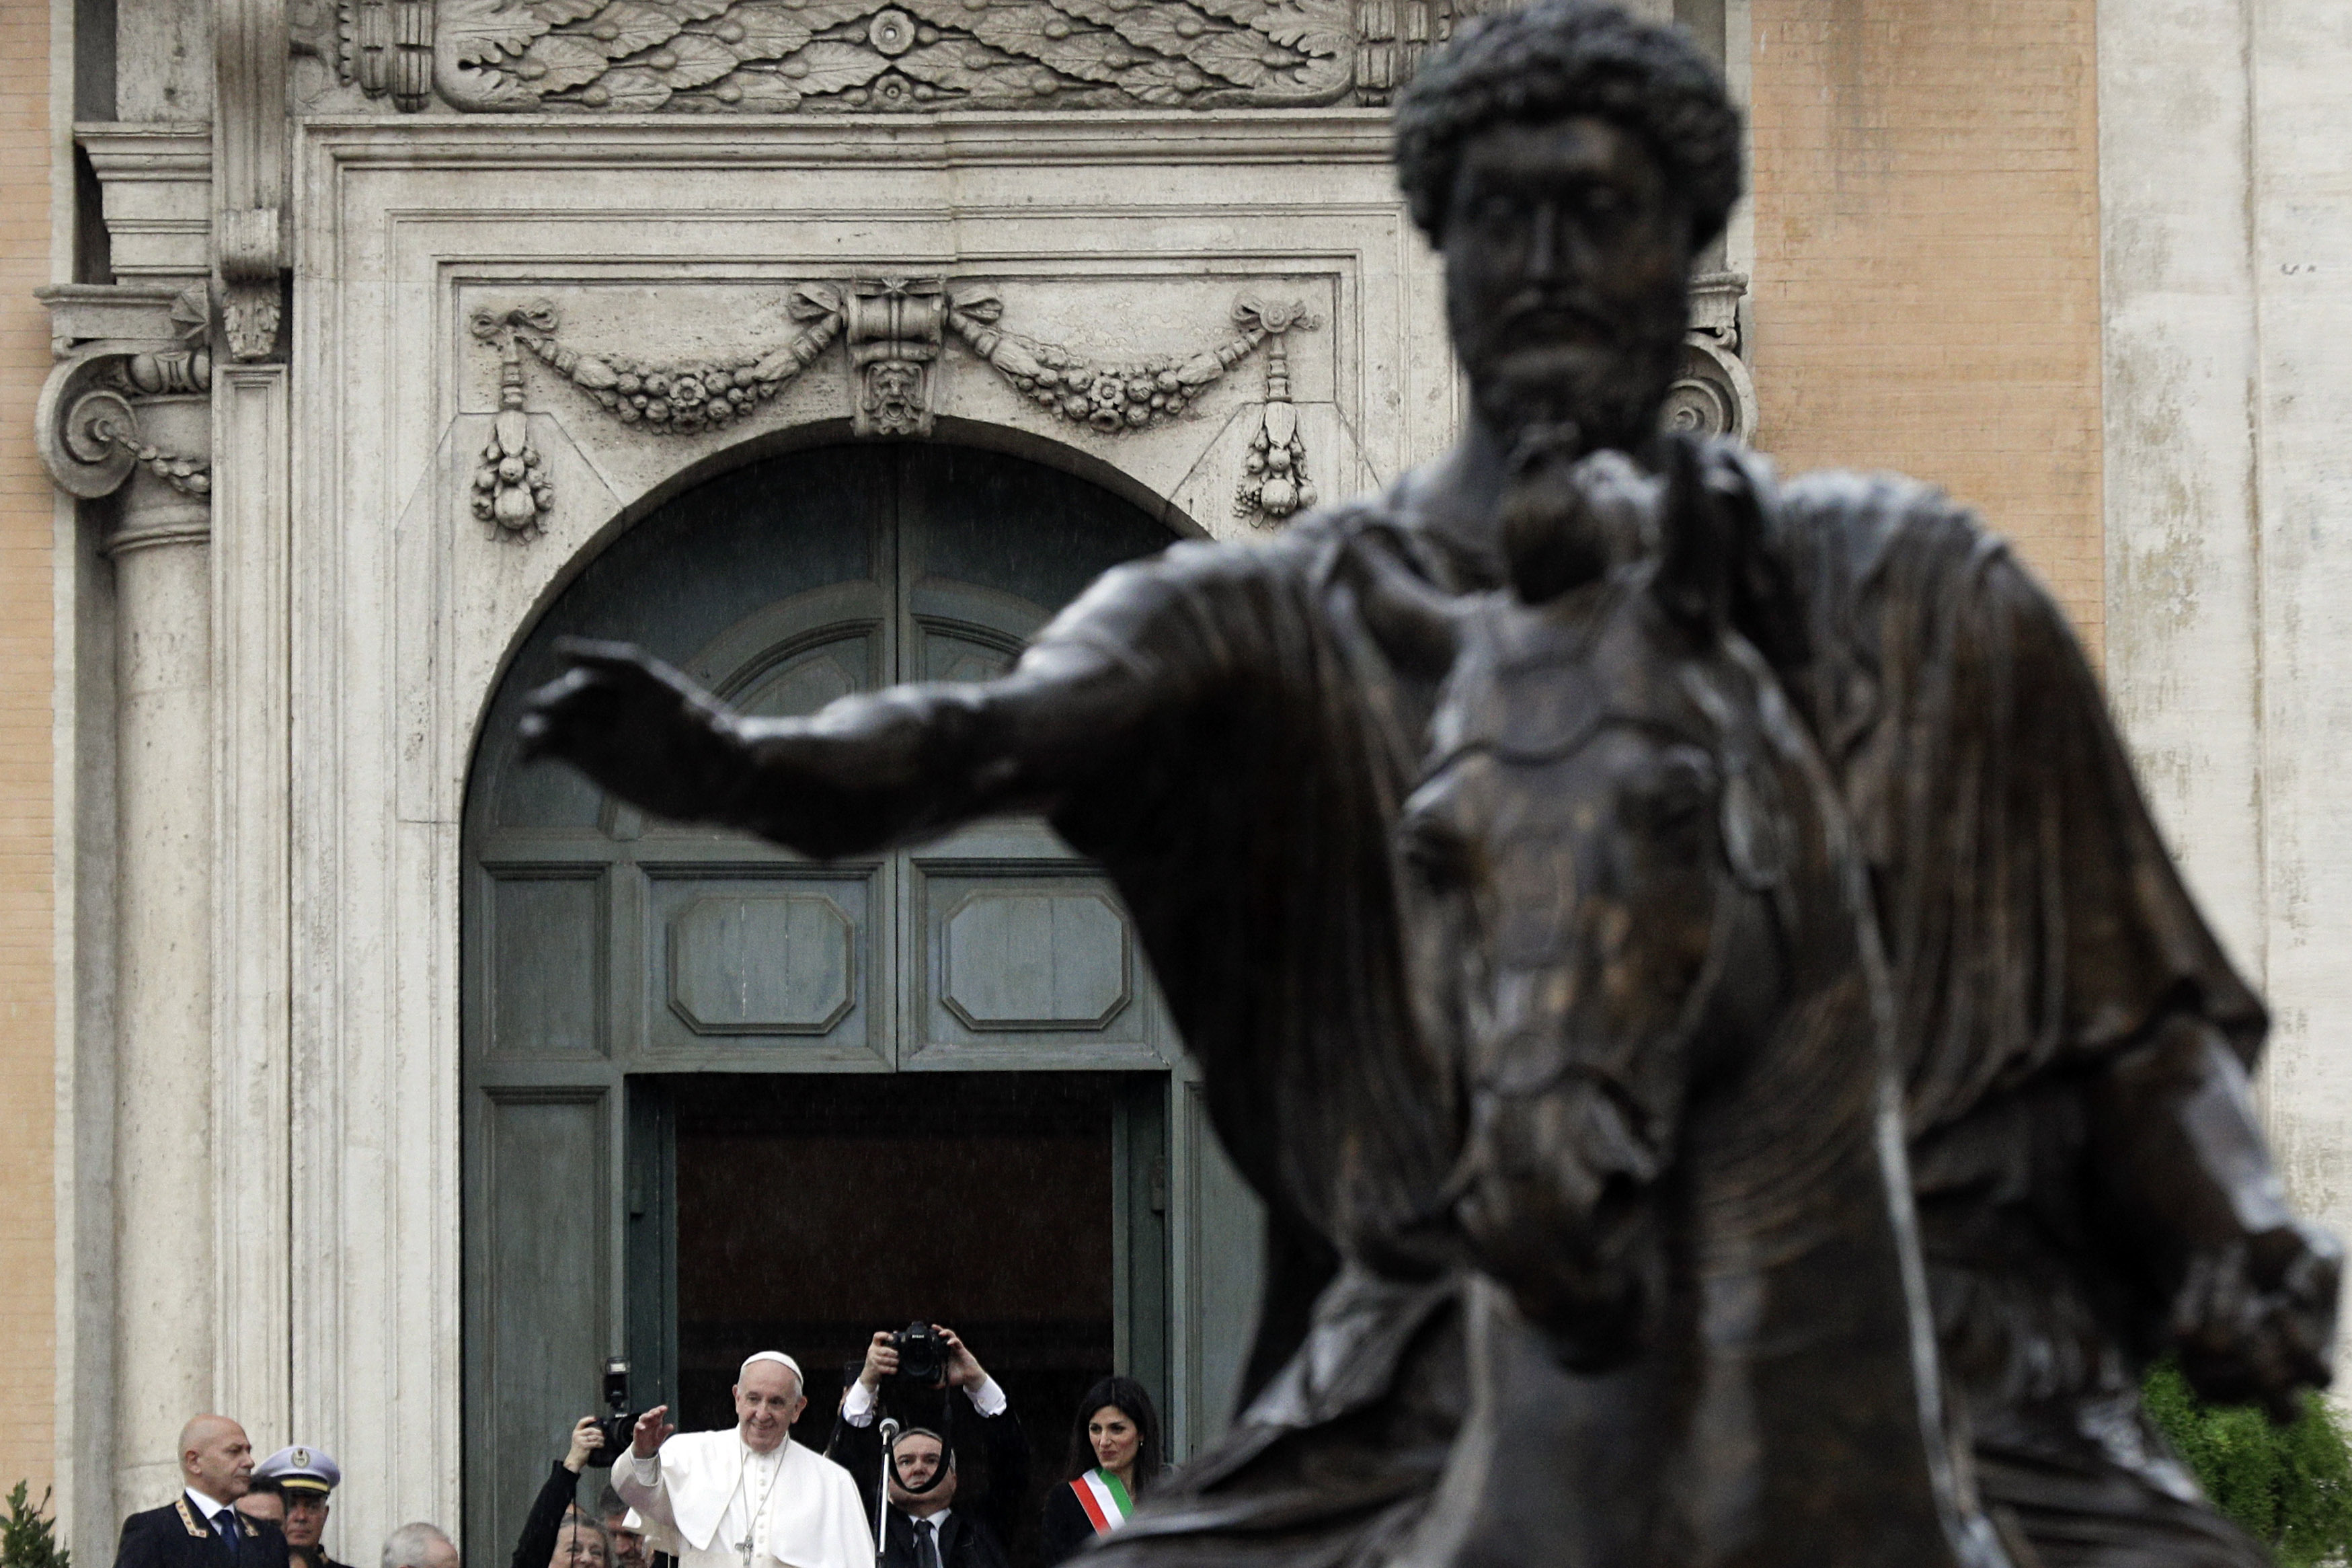 Pope Francis, framed by the bronze equestrian statue of Marcus Aurelius, delivers his speech during his visit at the Campidoglio, Capitol hill, in Rome, Tuesday, March 26, 2019. (AP Photo/Gregorio Borgia)